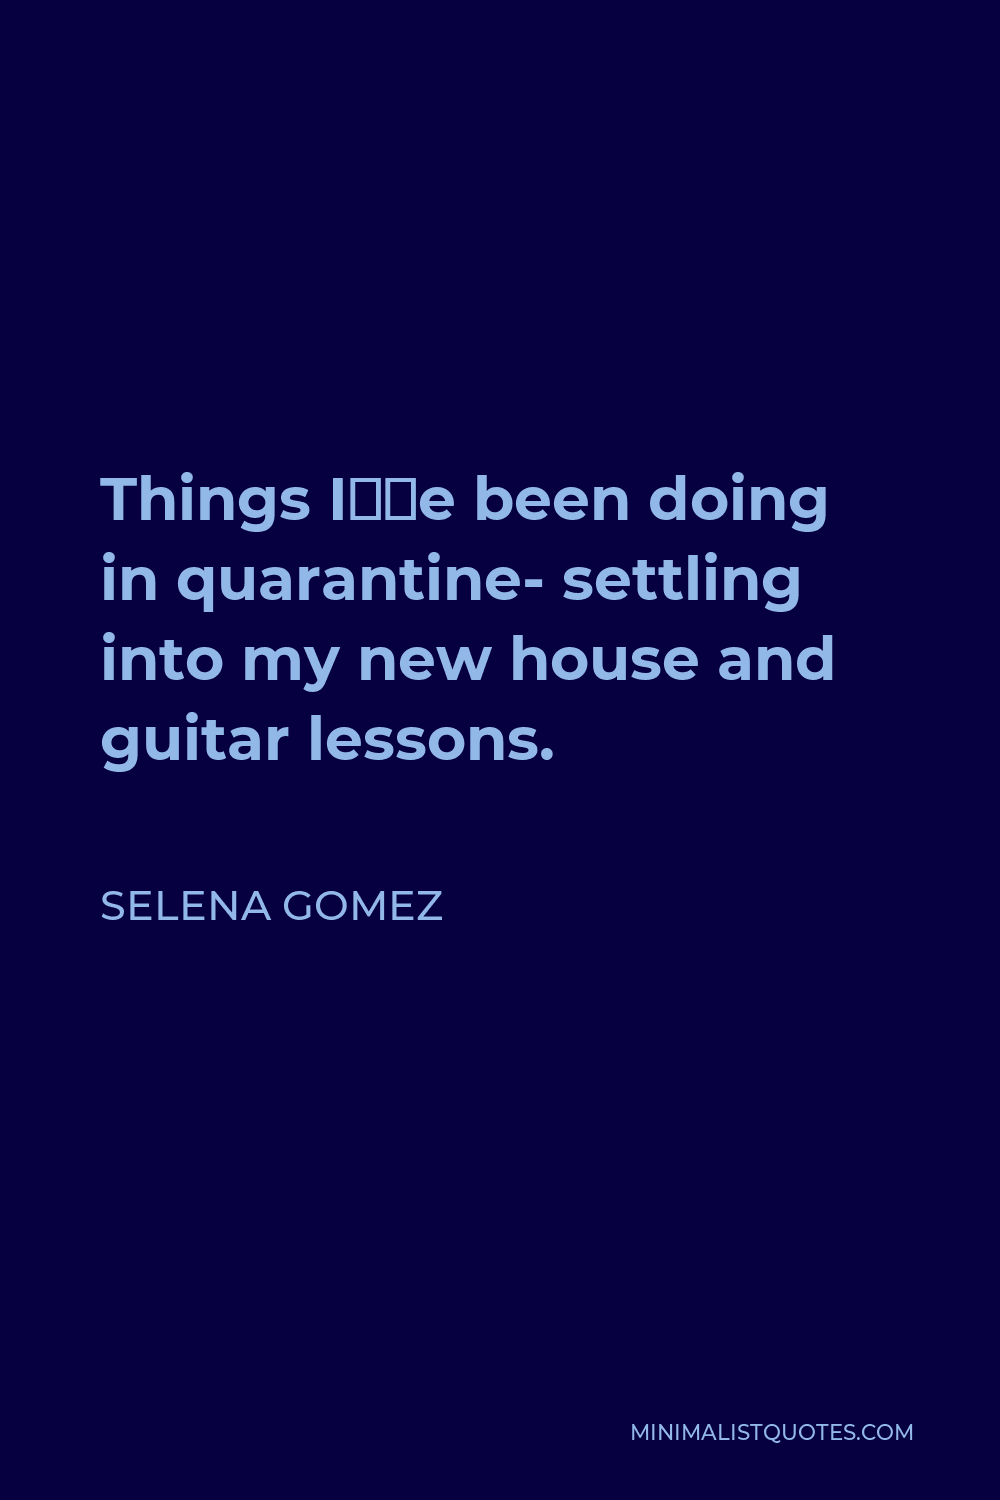 Selena Gomez Quote - Things I’ve been doing in quarantine- settling into my new house and guitar lessons.